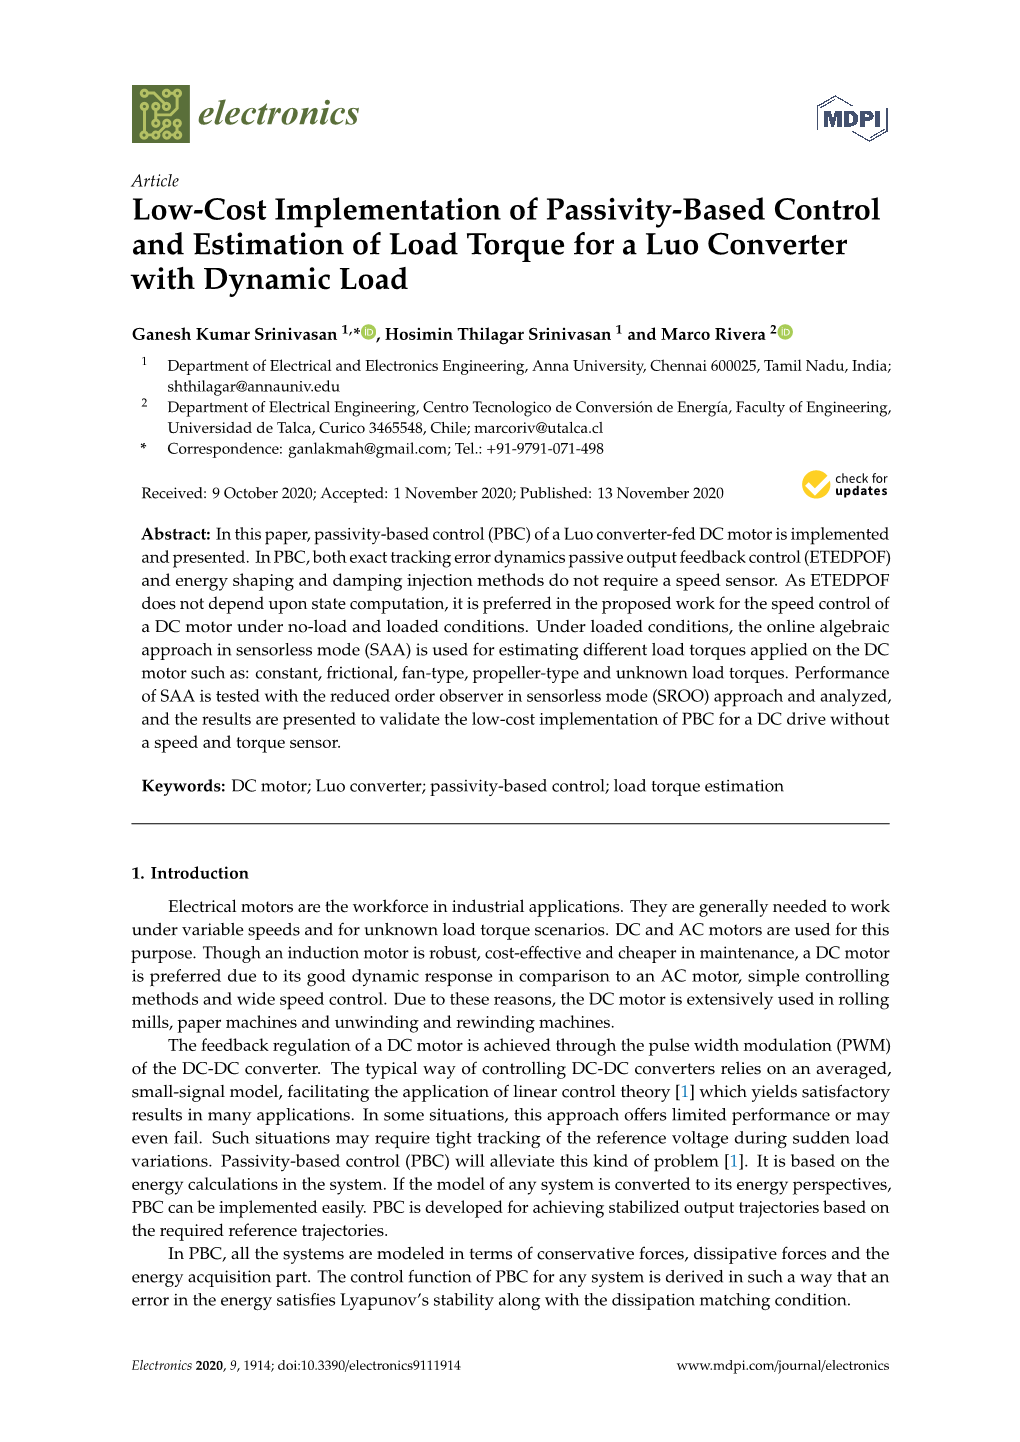 Low-Cost Implementation of Passivity-Based Control and Estimation of Load Torque for a Luo Converter with Dynamic Load